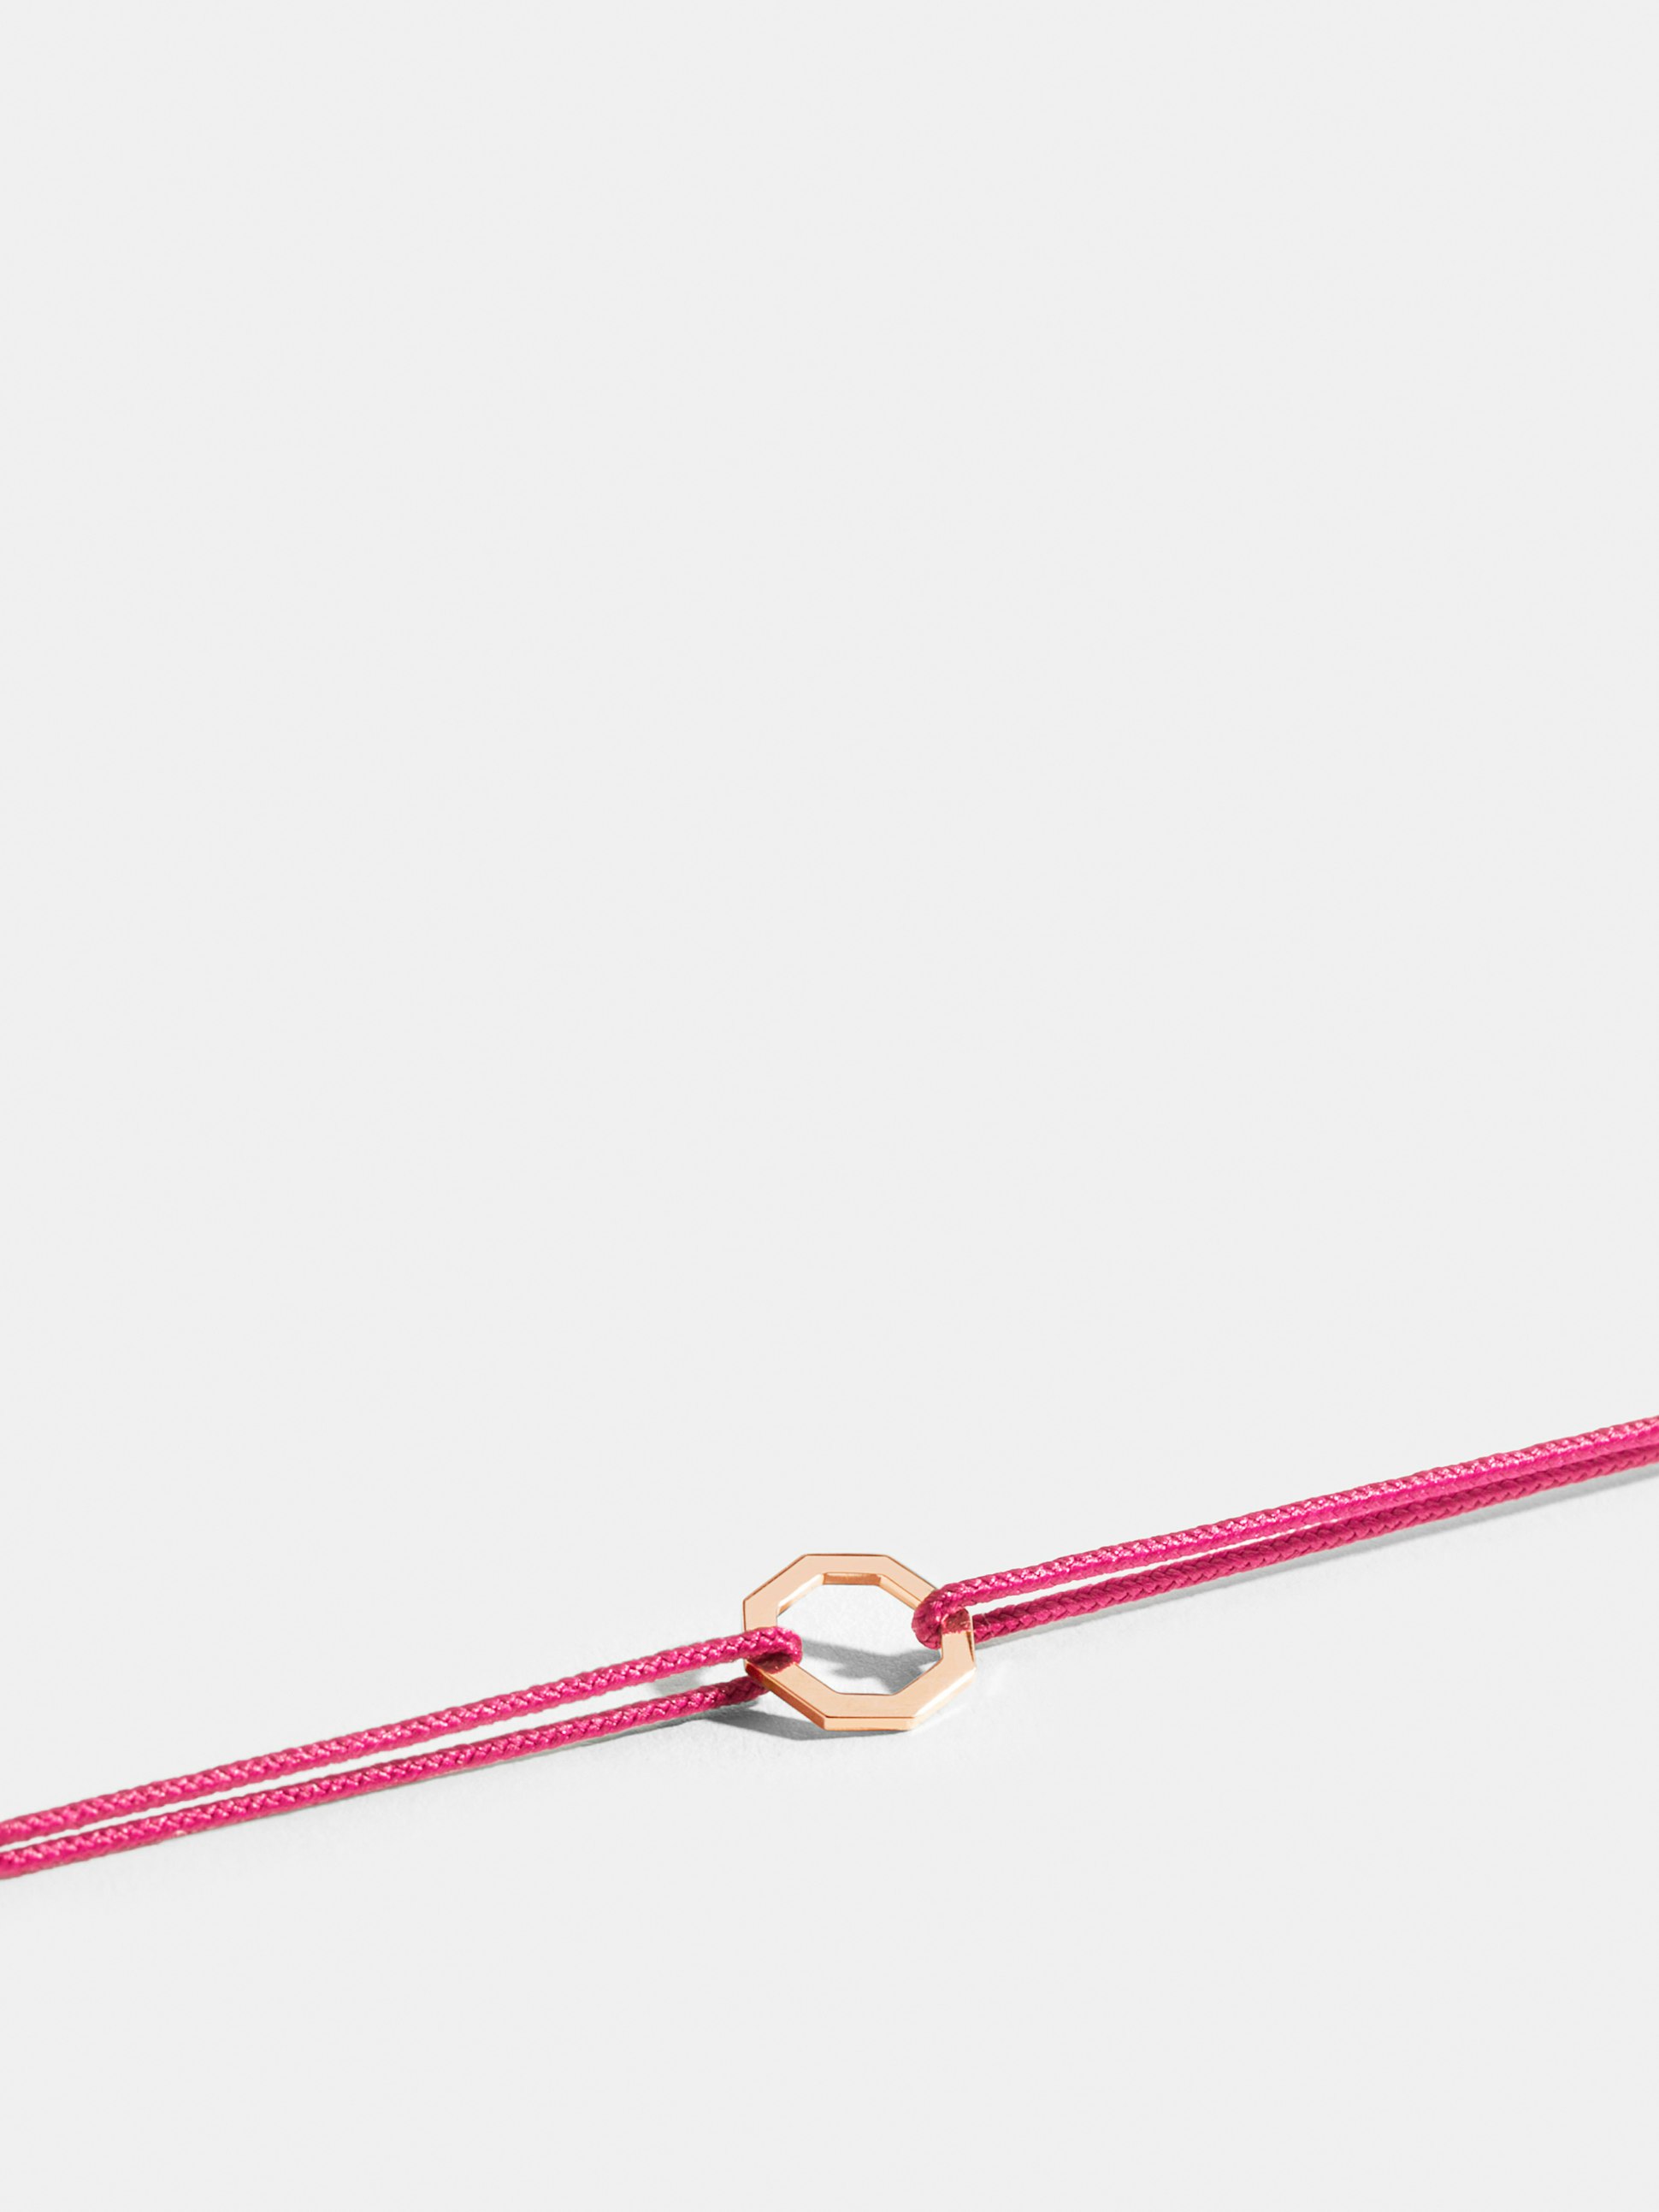 Octogone motif in 18k Fairmined ethical rose gold, on a fuschia pink cord. 